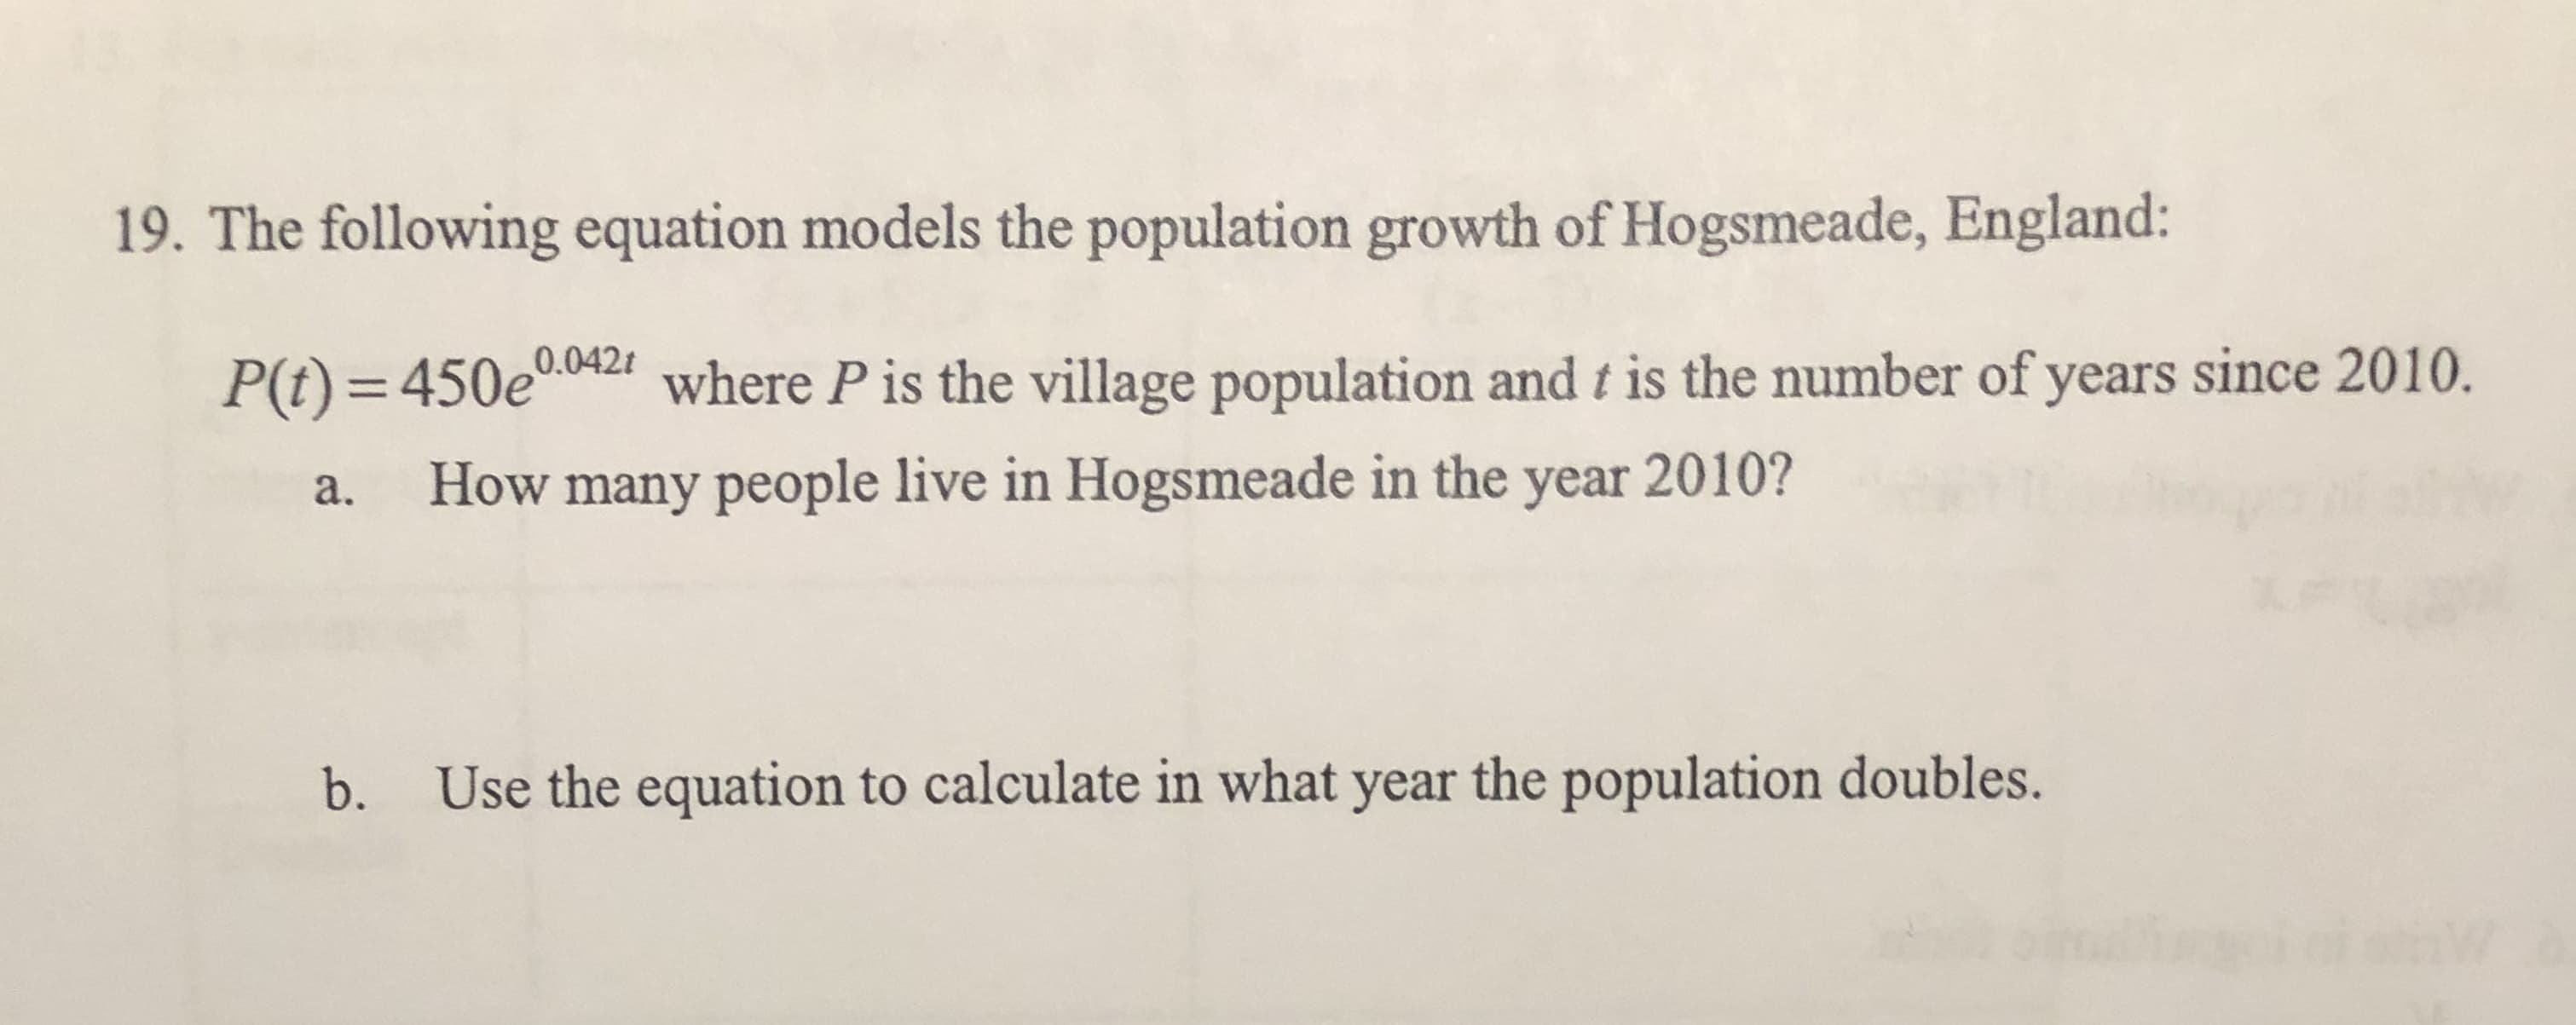 19. The following equation models the population growth of Hogsmeade, England:
0.042t
P(t) = 450e00ar where P is the village population and t is the number of years since 2010.
%3D
How many people live in Hogsmeade in the year 2010?
a.
Use the equation to calculate in what year the population doubles.
b.
